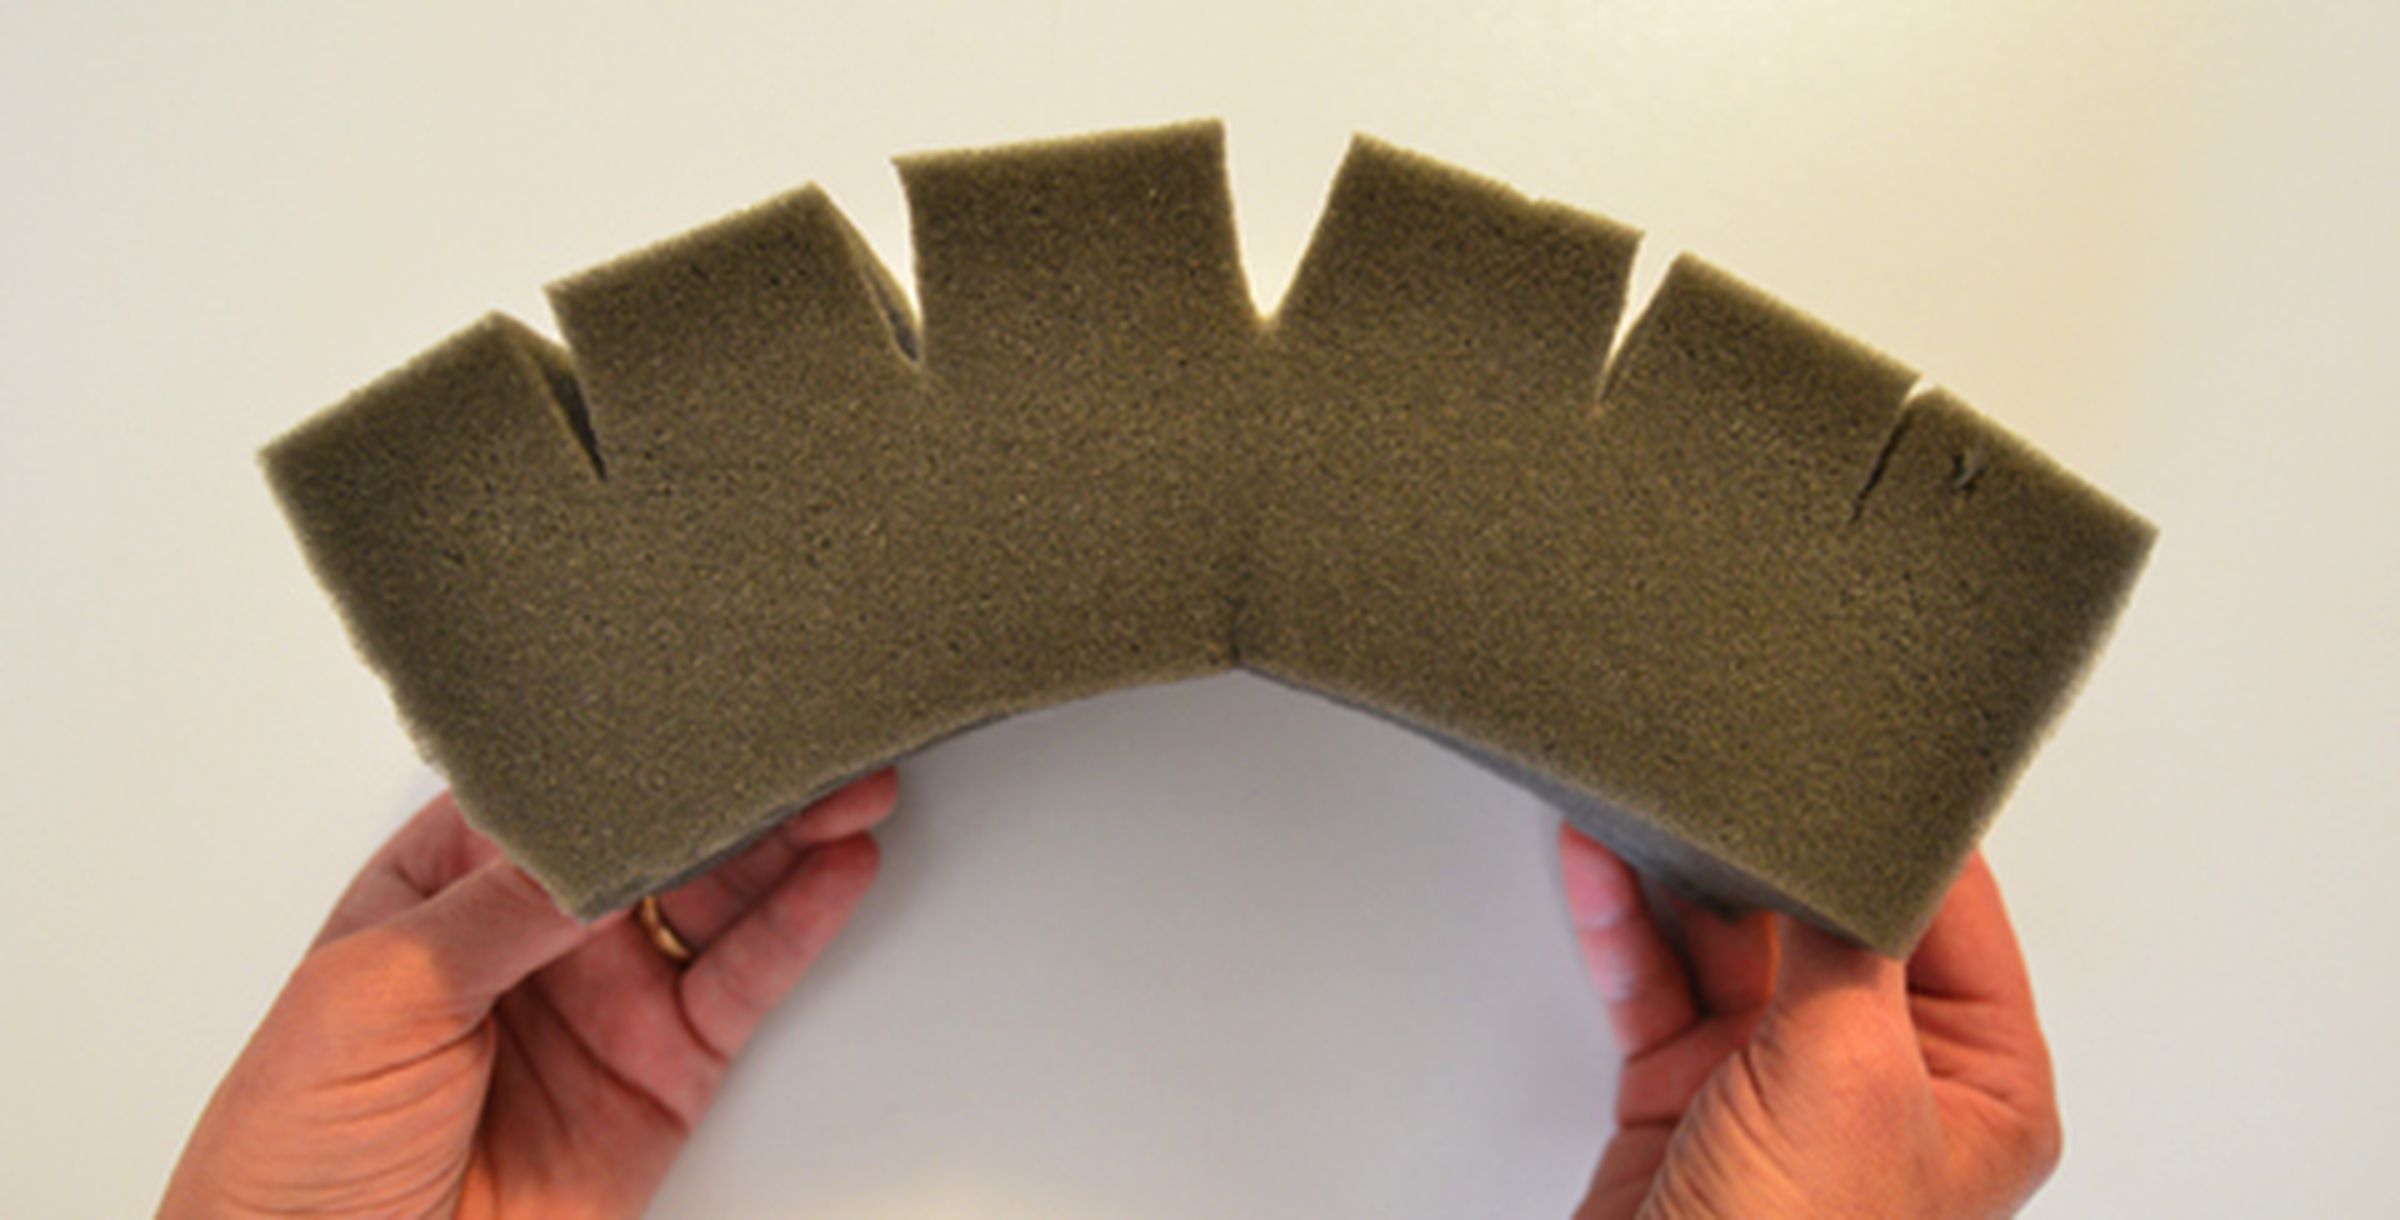 Corning uses foam to easily illustrate why a crack might be a problem when bending.